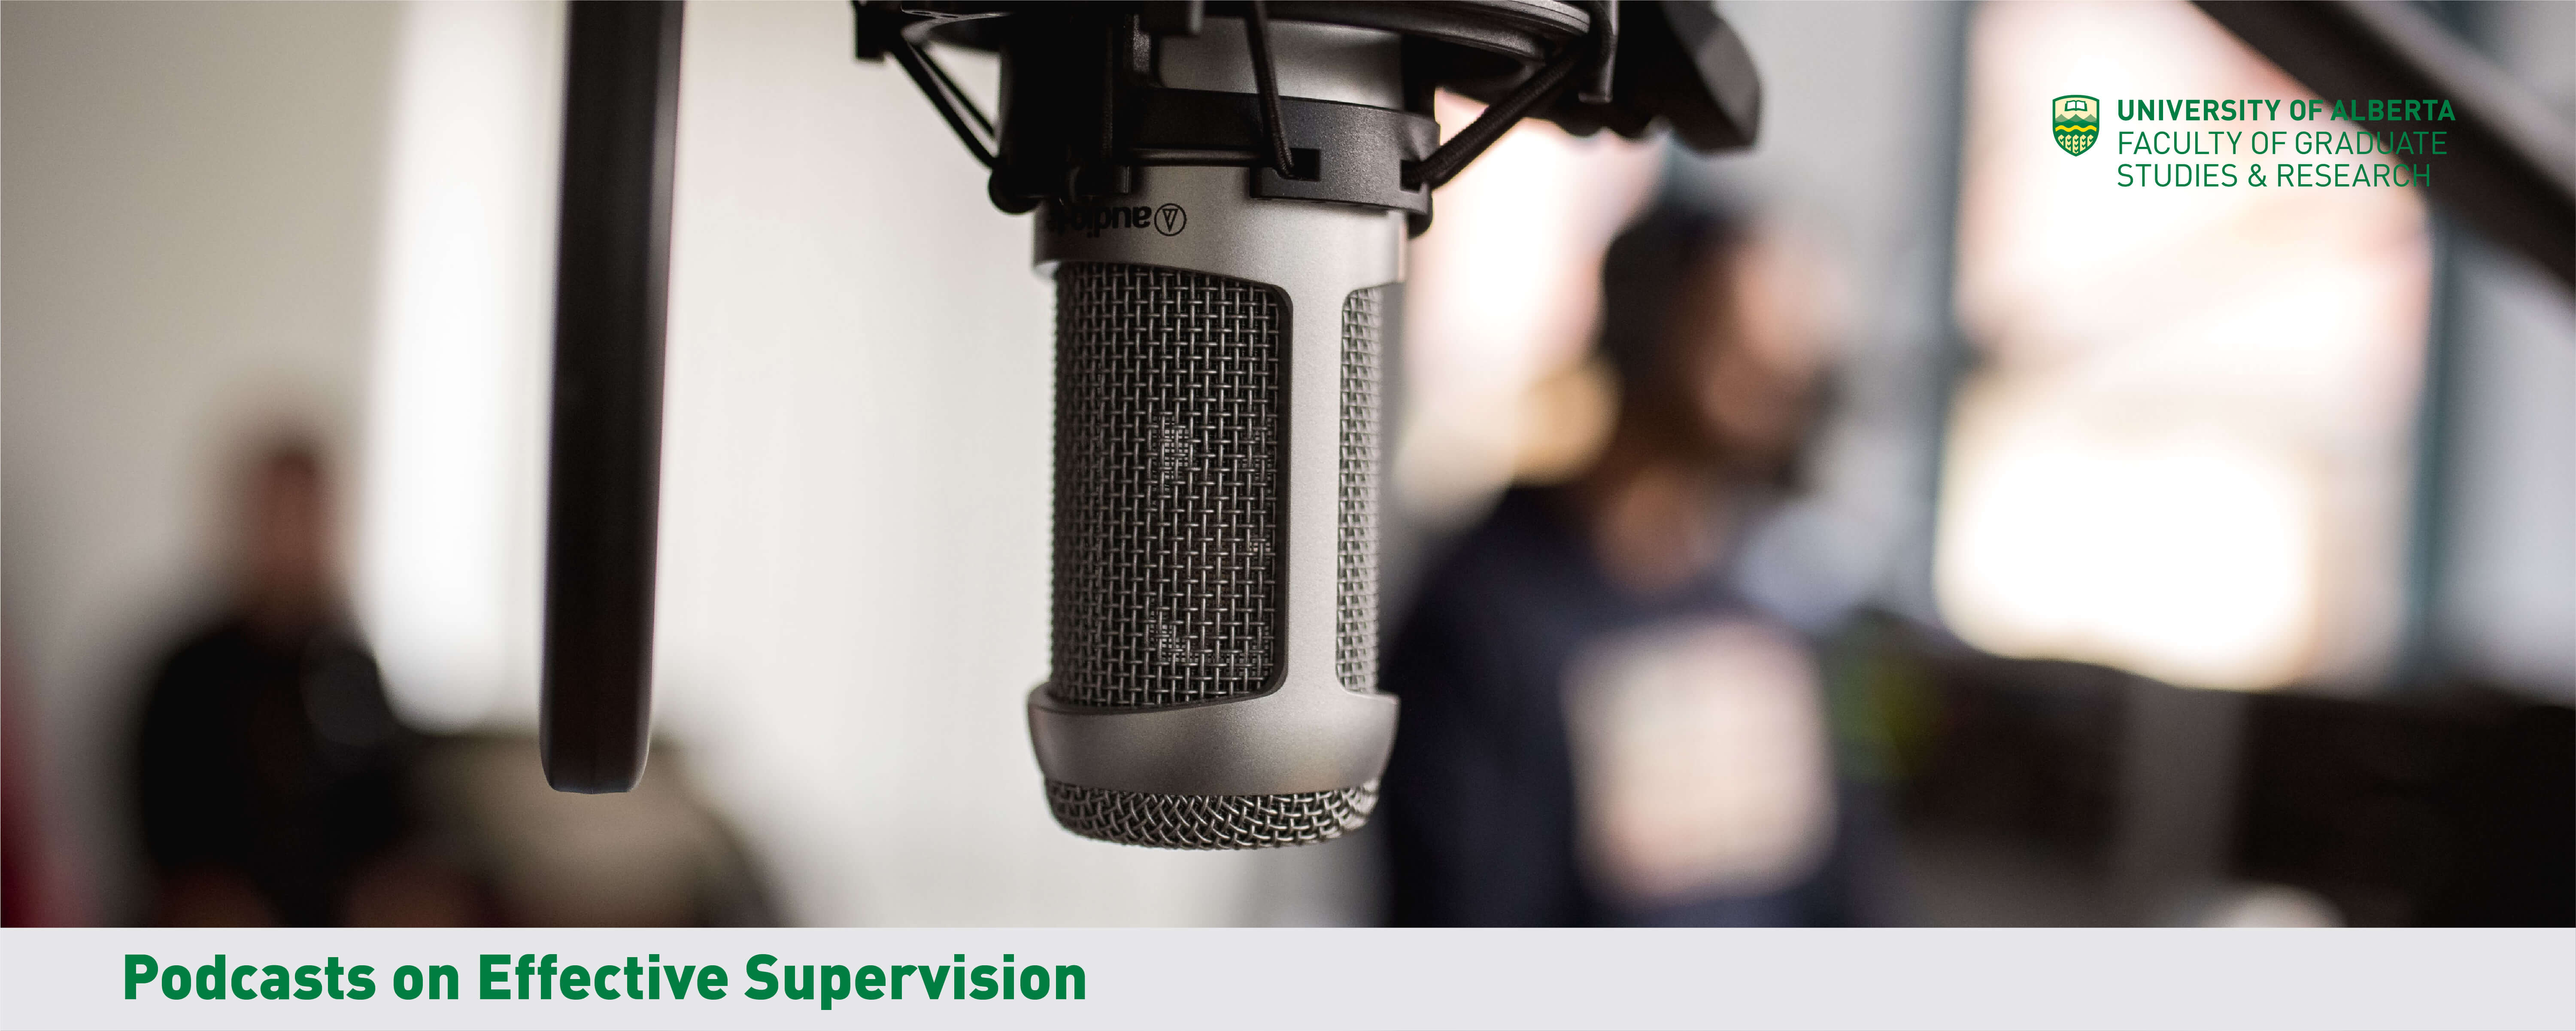 Podcasts on Effective Supervision